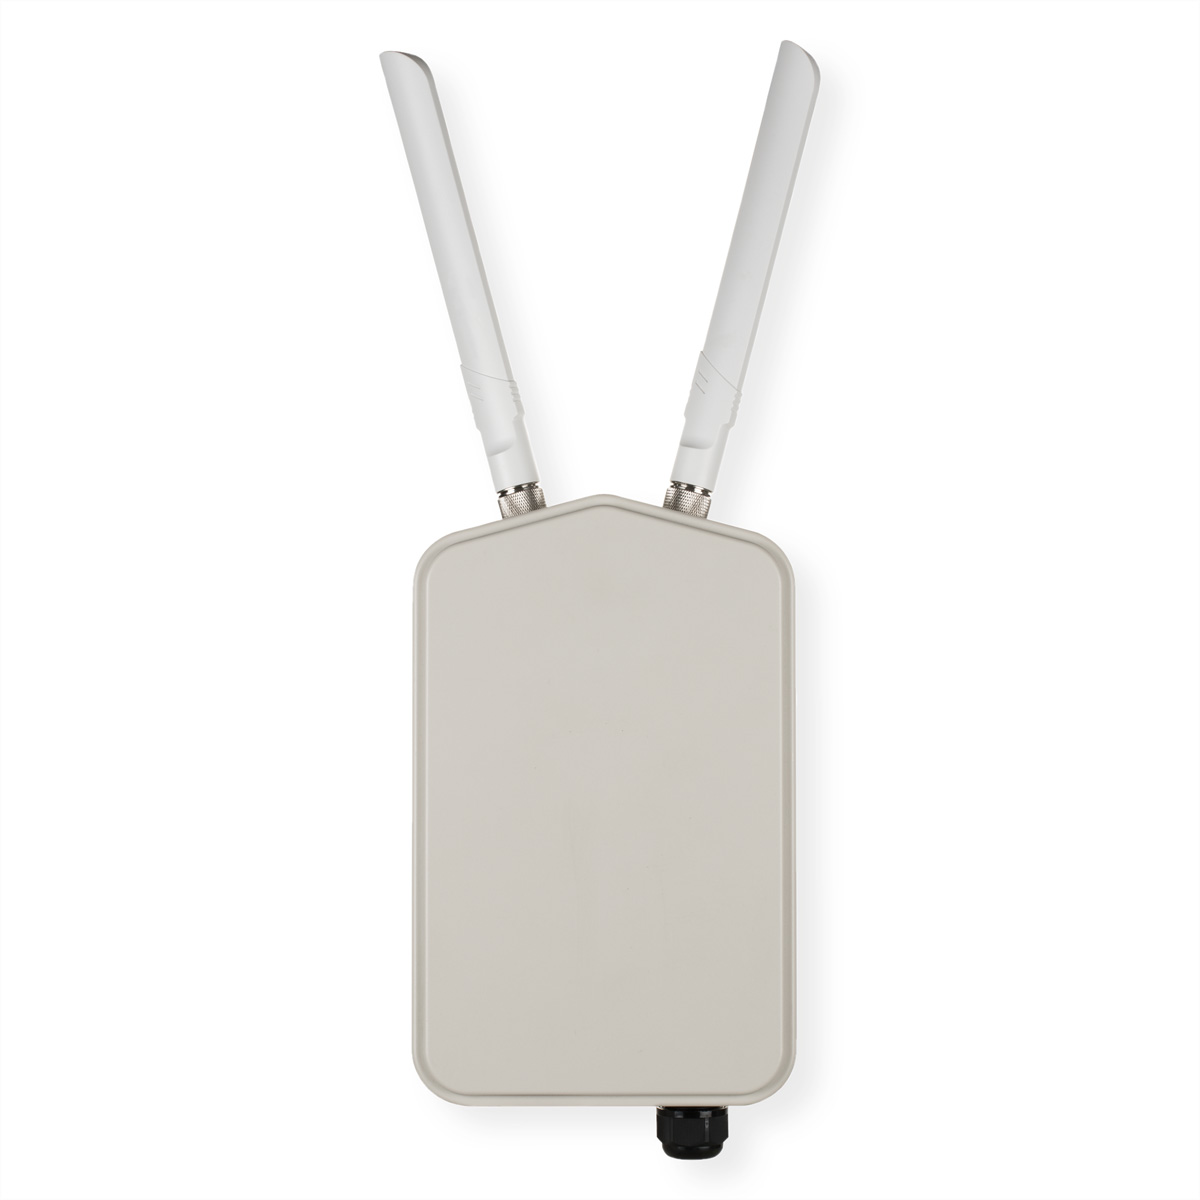 AC1300 DWL-8720AP Dual Band Wave Unified Gbit/s 1,3 Access Access Outdoor Point D-LINK Point 2